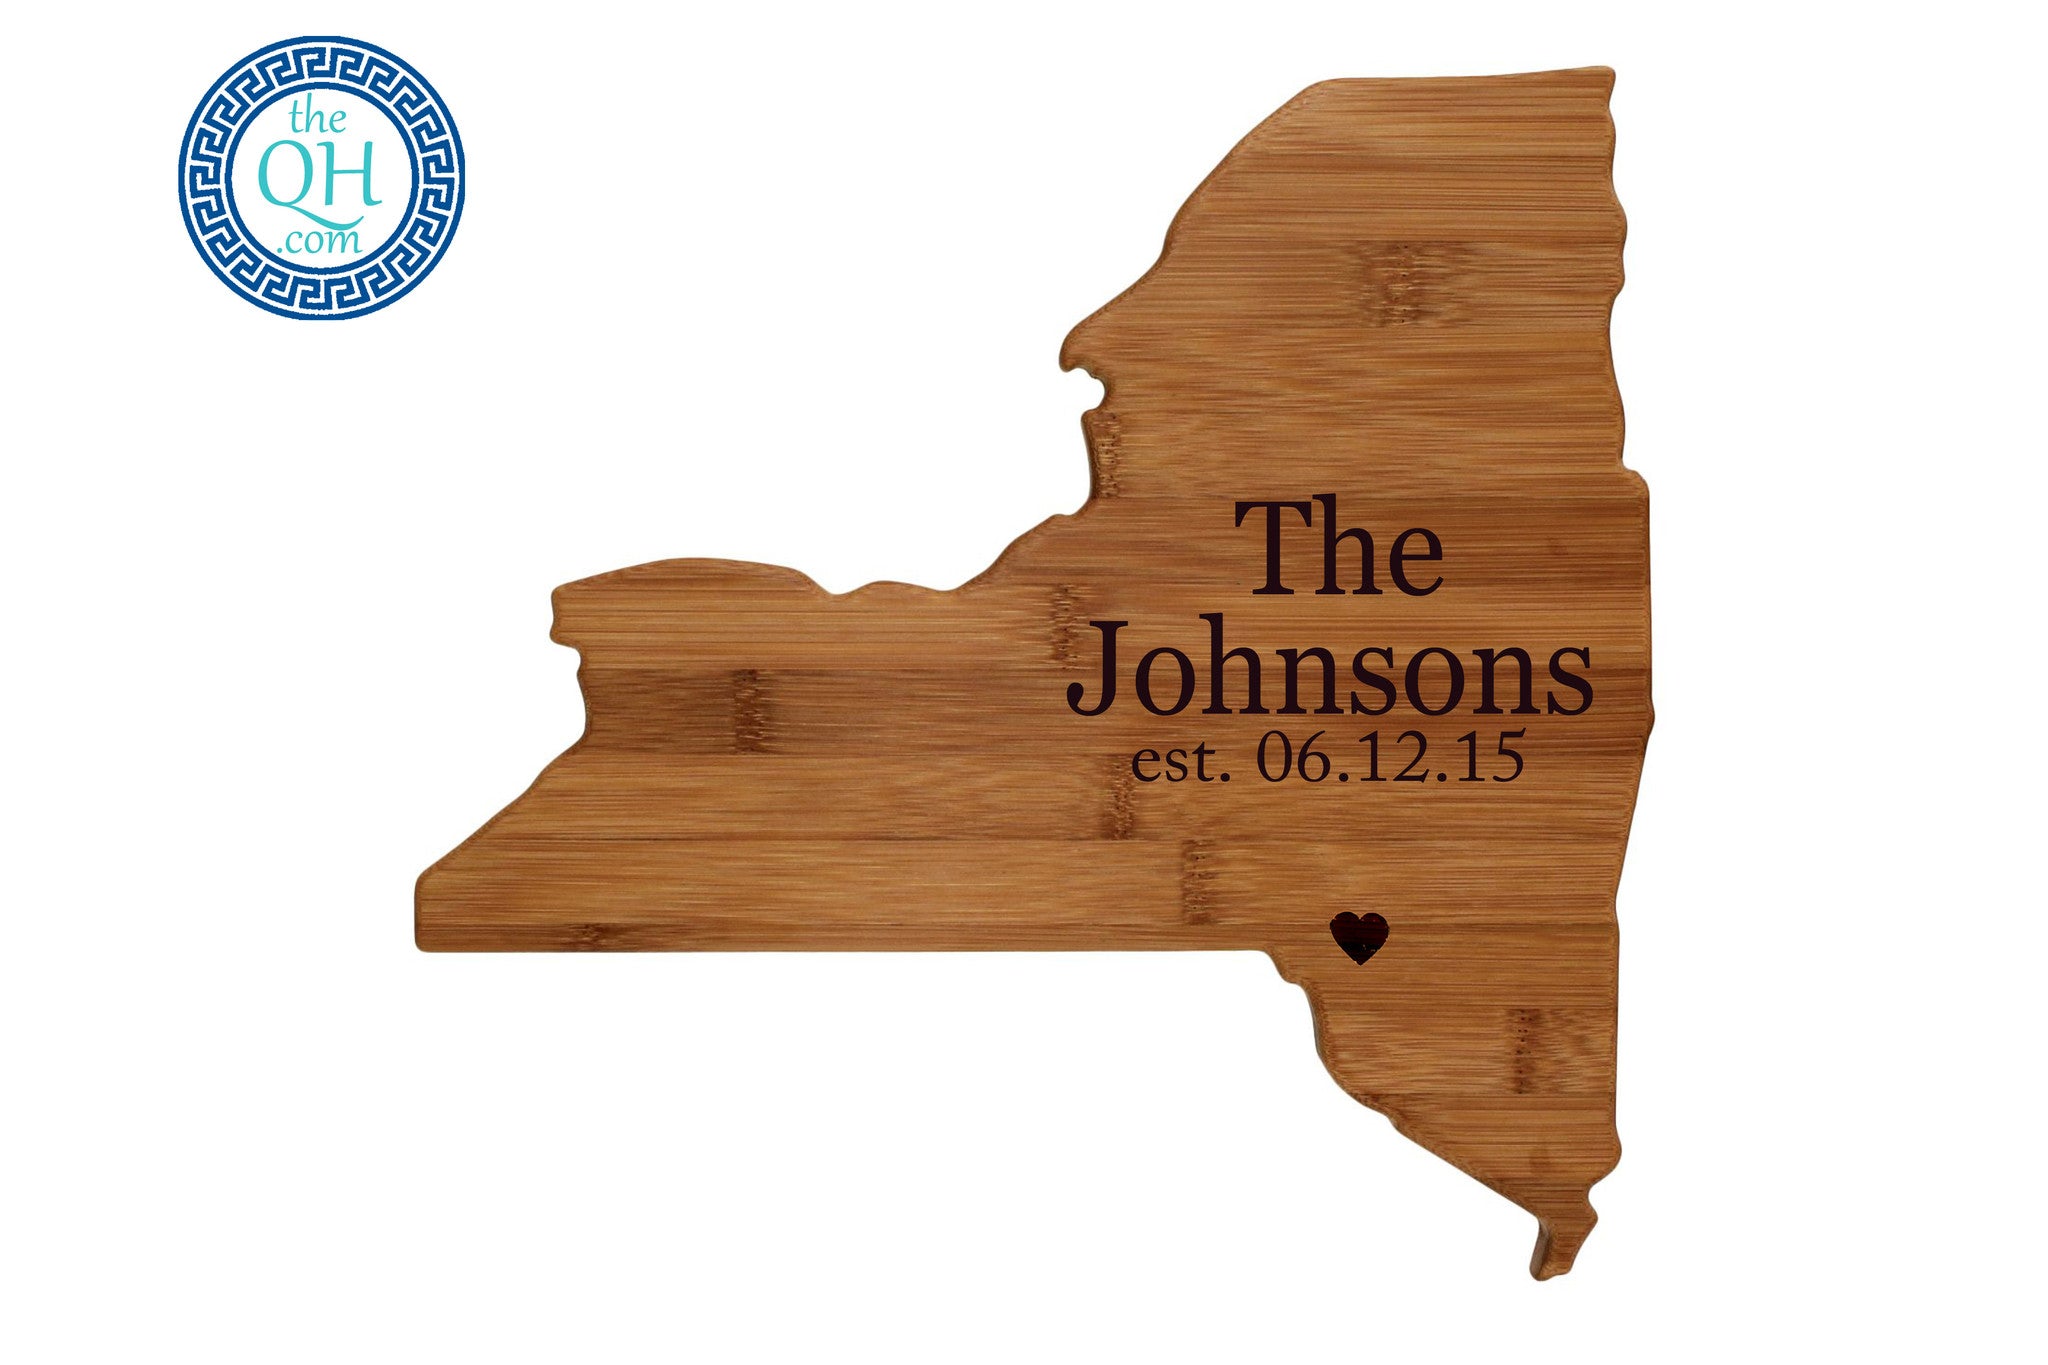 New York Shaped Cutting Board Serving Tray Gift